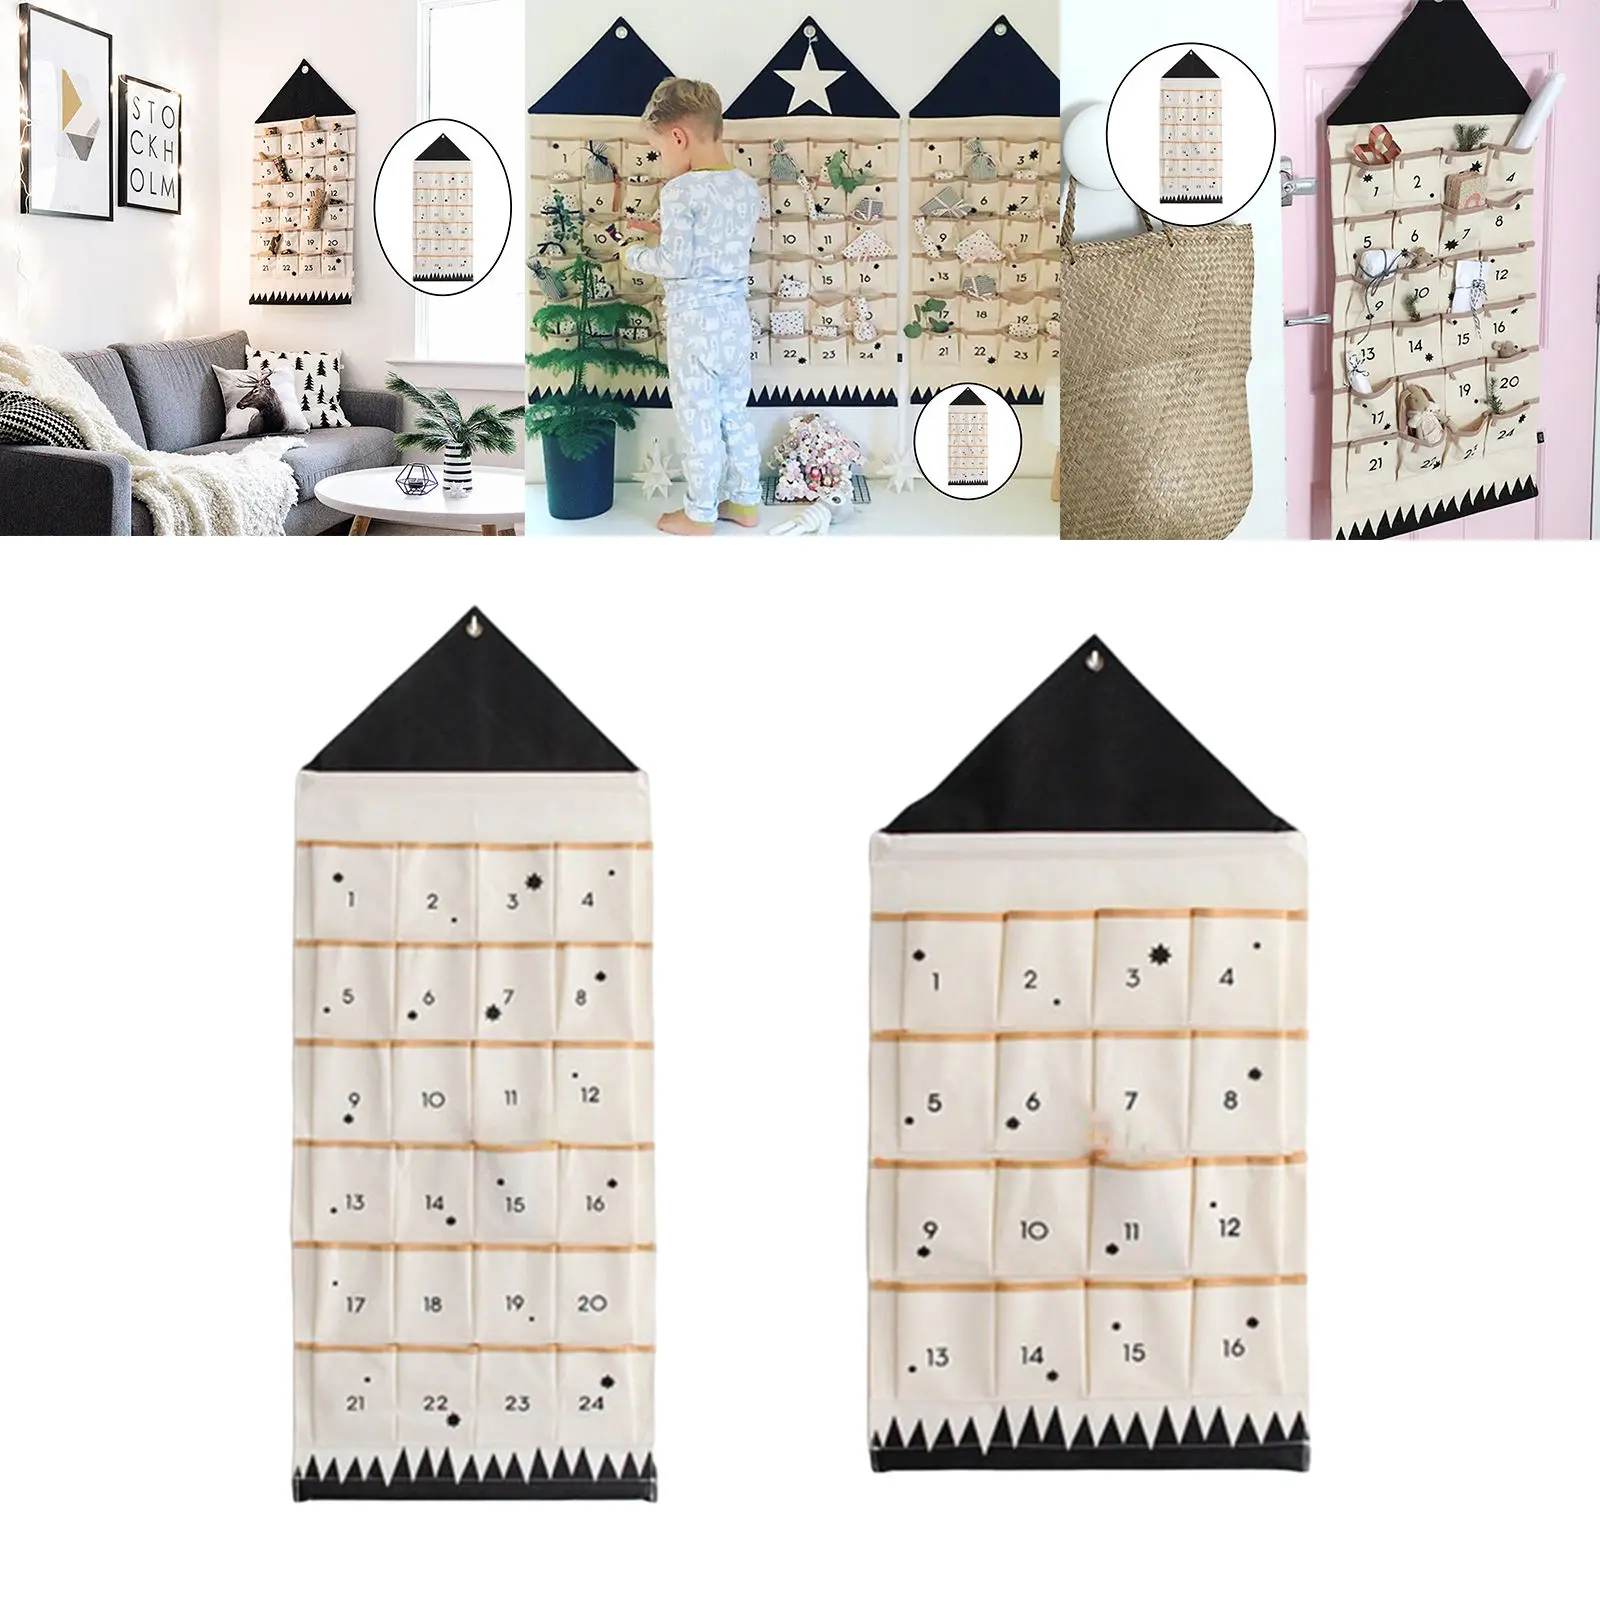 Christmas Advent Calendar Wall Bag Wall Hanging with Pockets Xmas Decorations Advent Calendar to Fill Large for Home Decoration